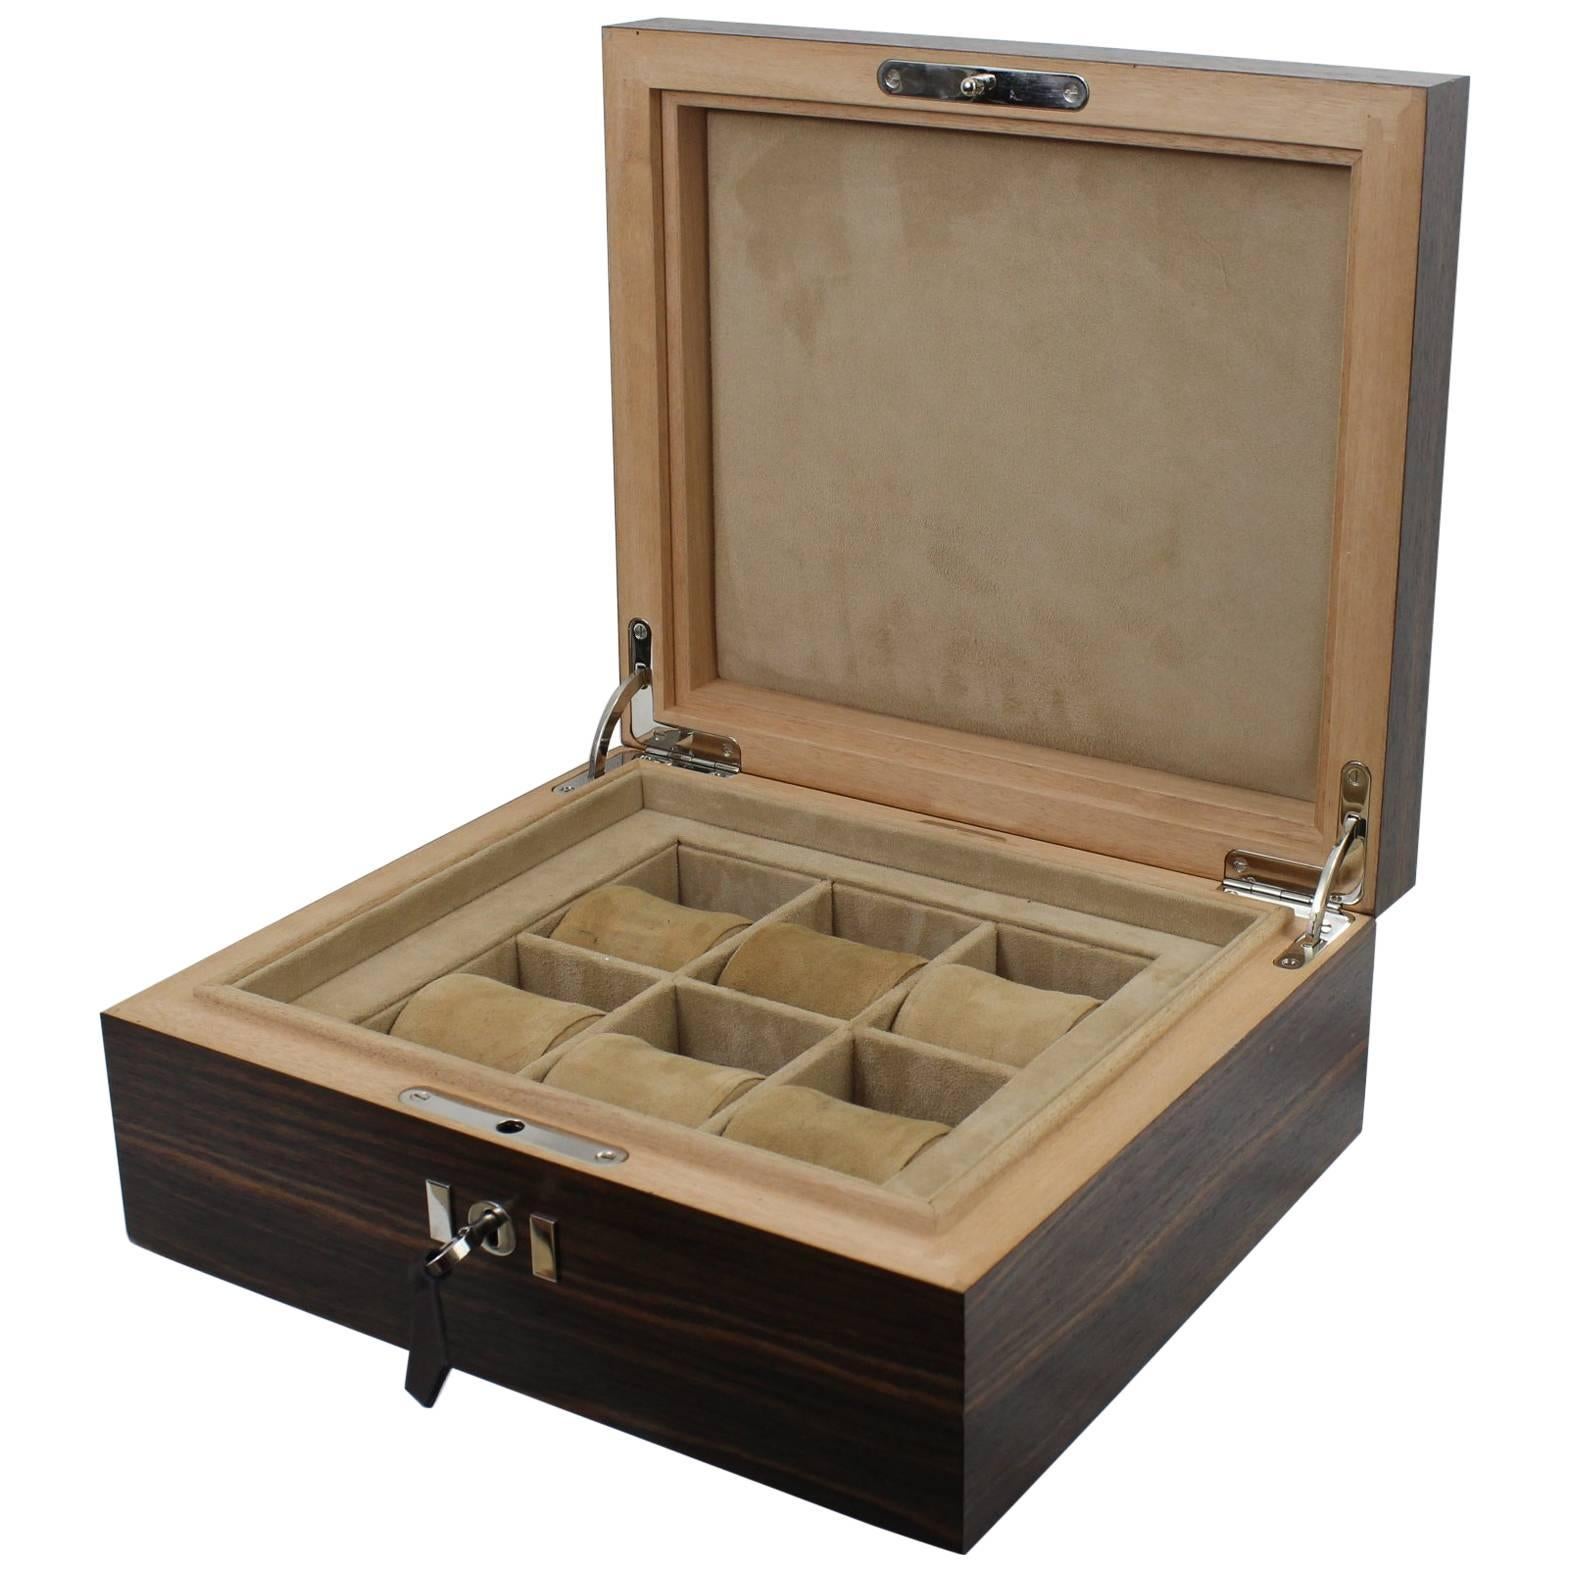 Hermes Wood and Leather Watch Box